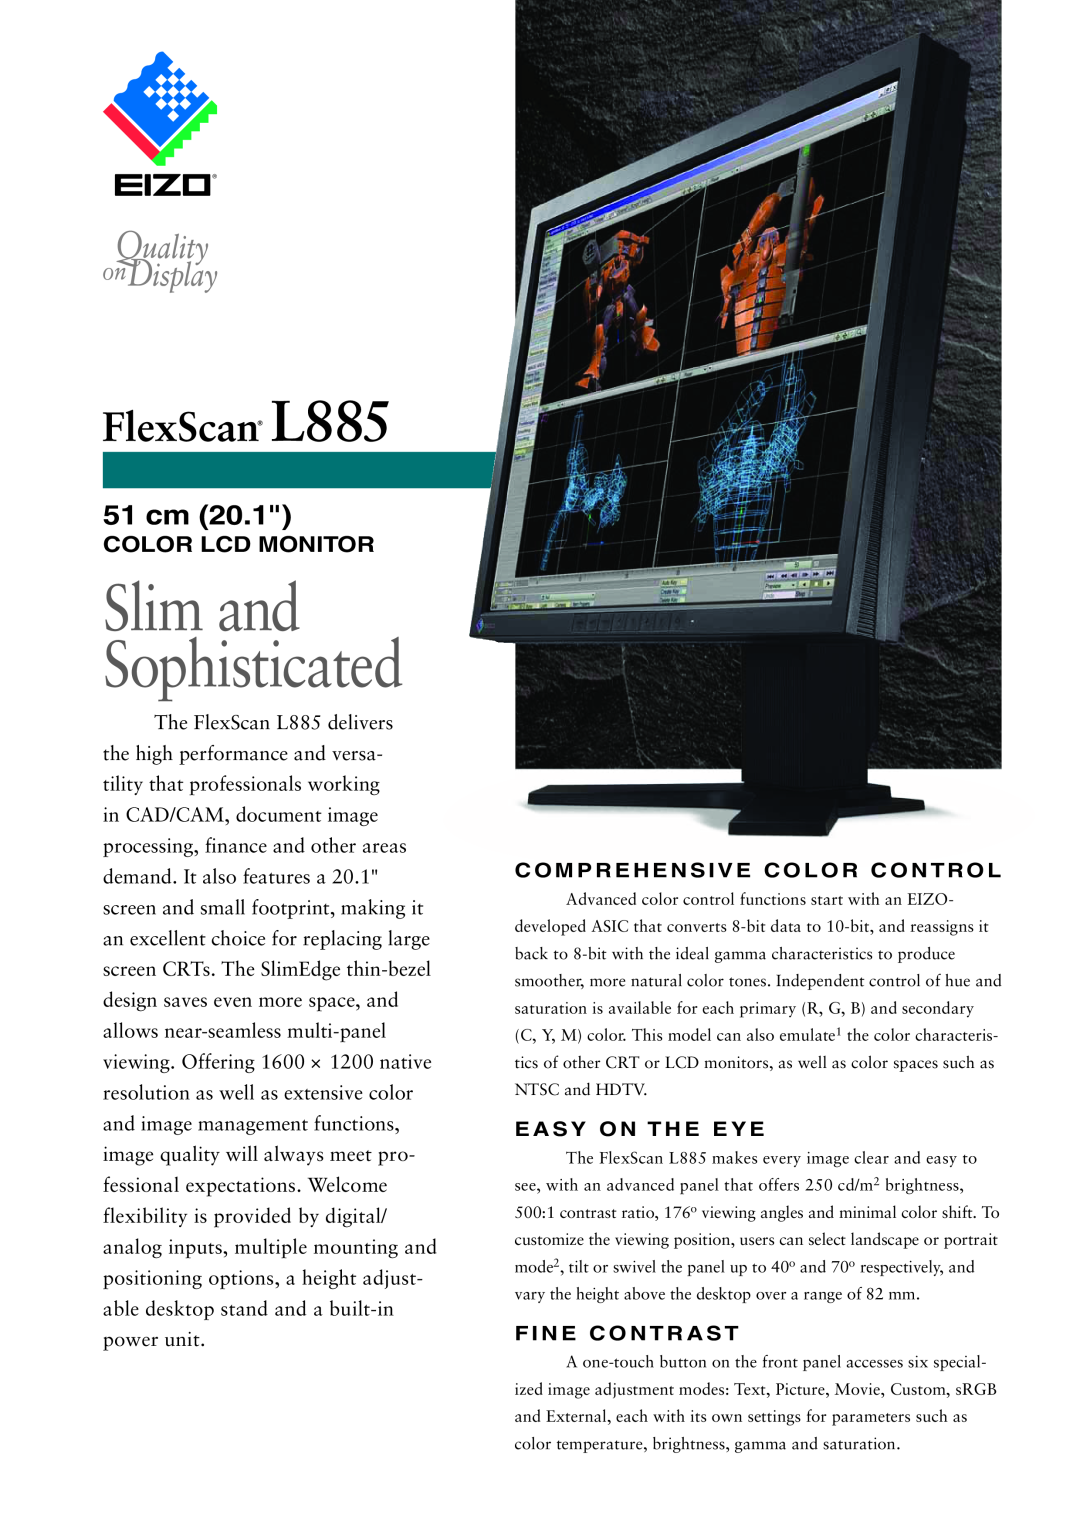 Eizo FlexScan L885 manual 51 cm, Color Lcd Monitor, Slim and Sophisticated, Comprehensive Color Control, Easy On The Eye 